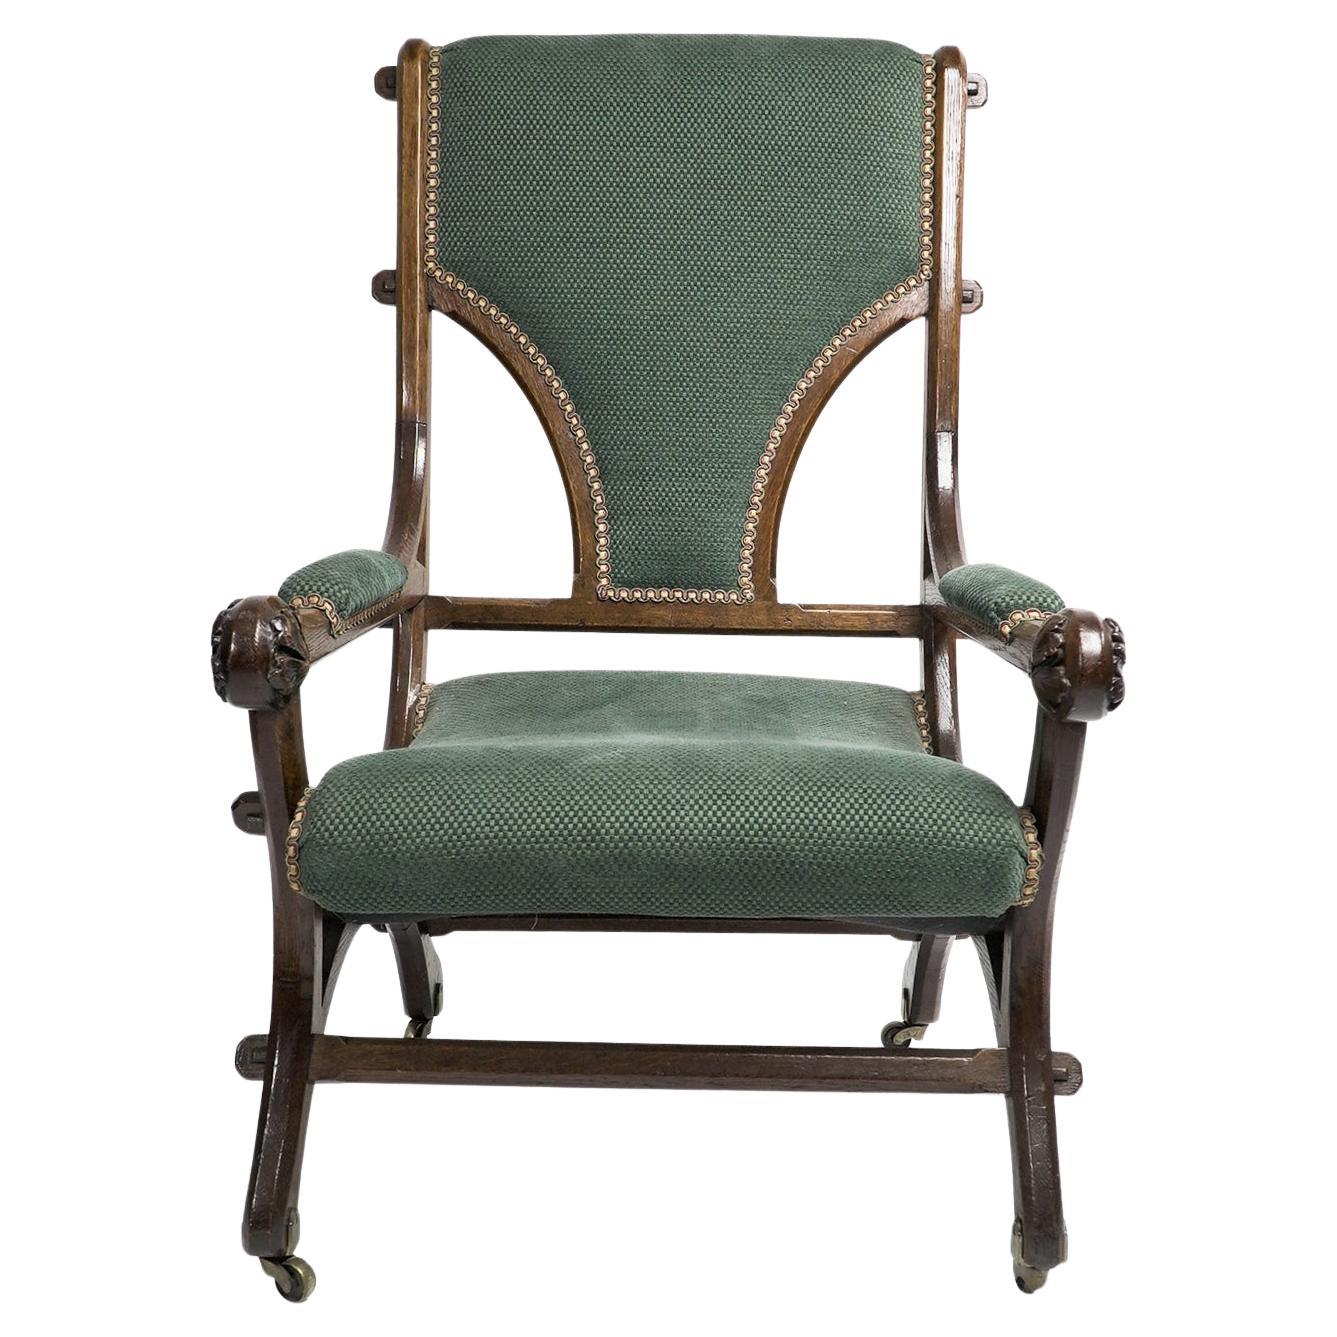 John Pollard Seddon attributed. A Gothic Revival oak armchair with through pegged tenon joints that have faceted edges to the ends of the tenon, a typical detail Seddon used often. The overall style and design has a good flow to it with soft